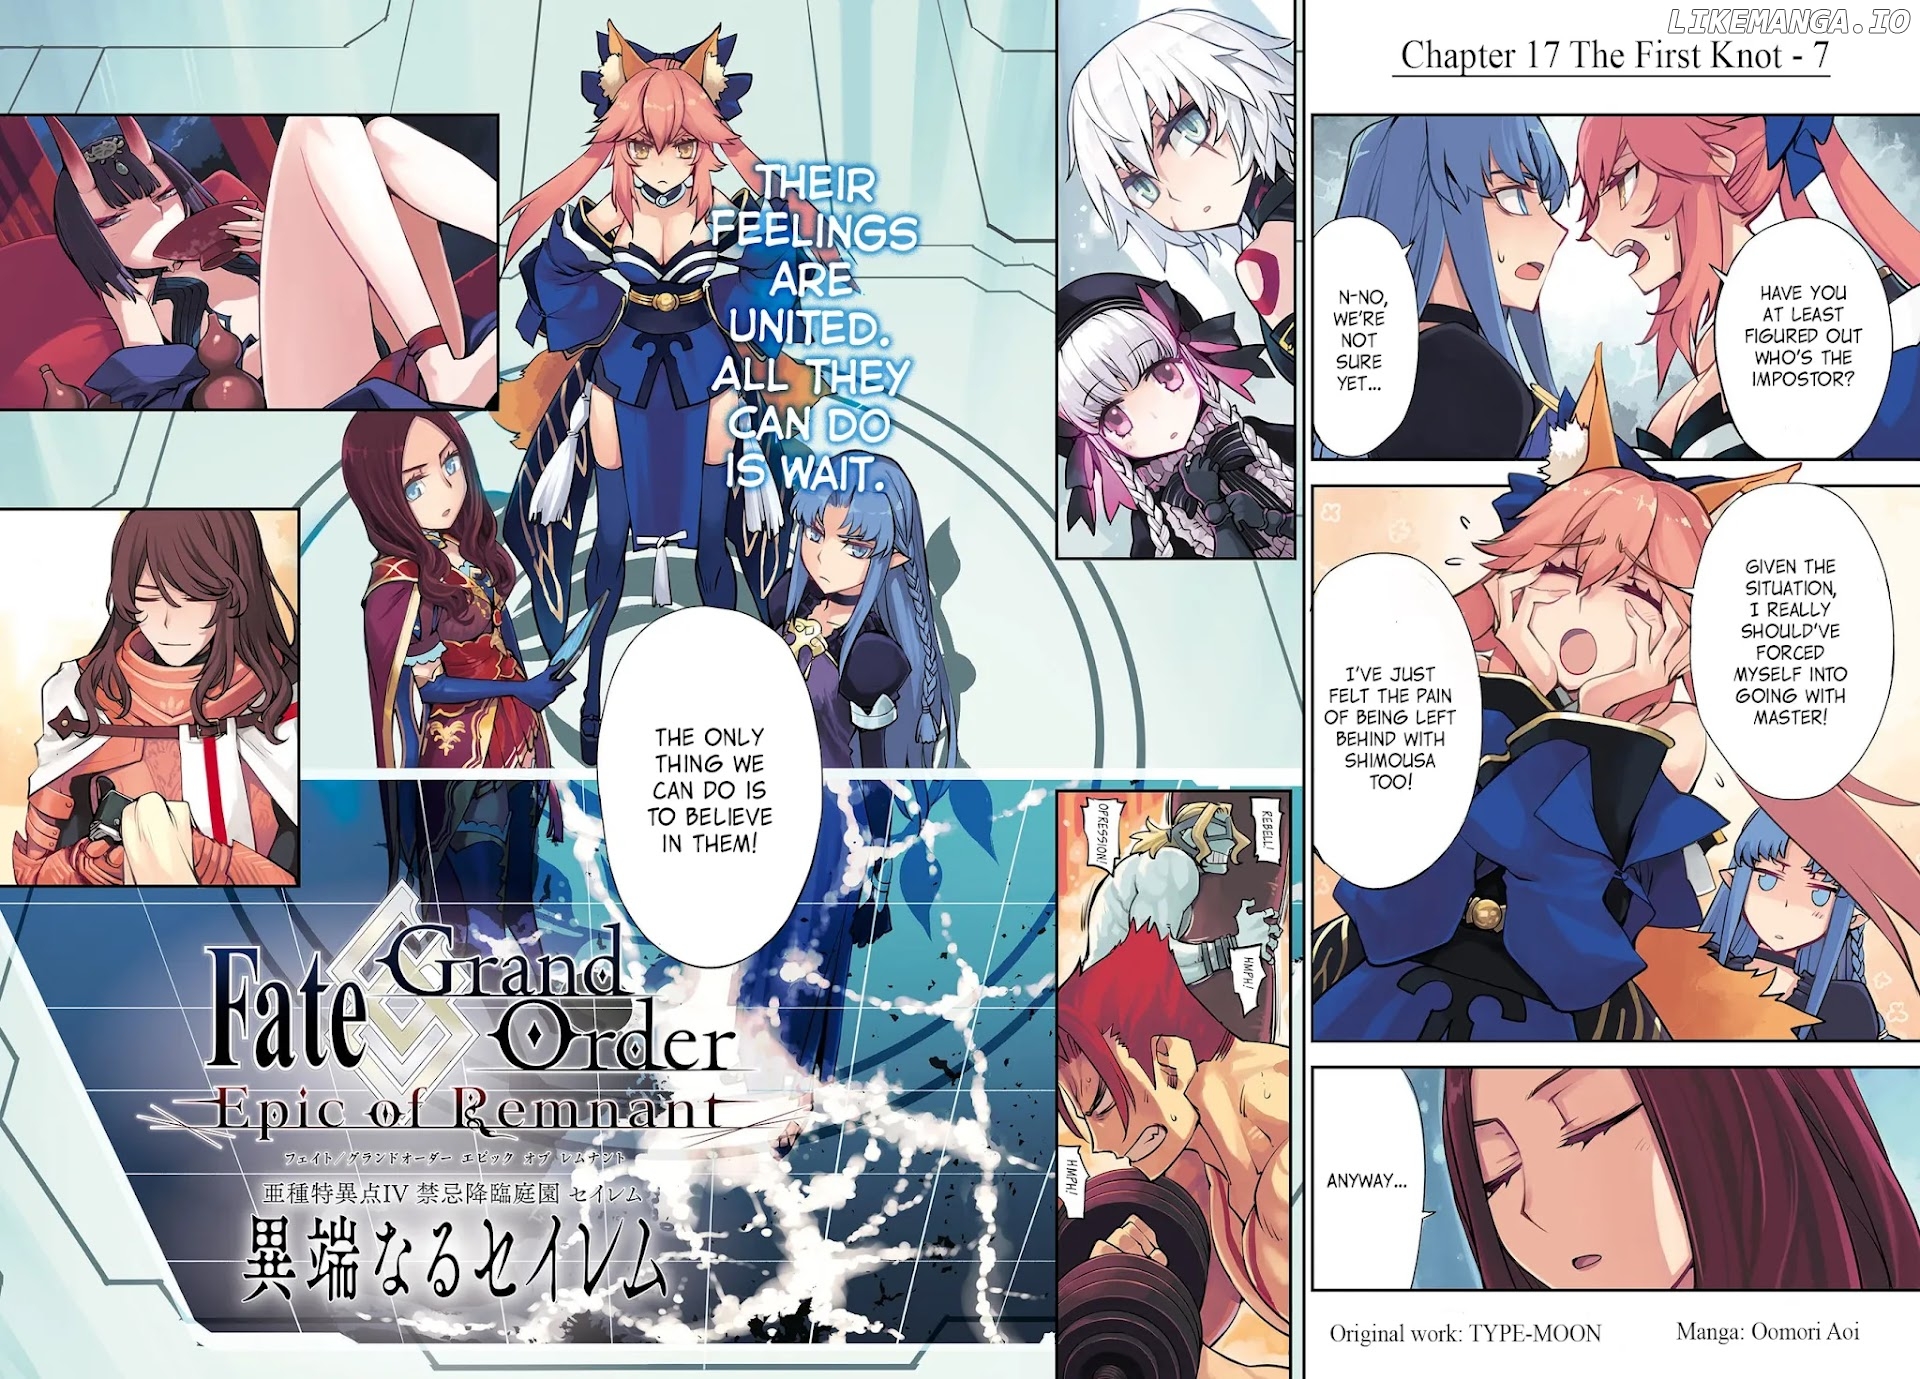 Fate/Grand Order: Epic of Remnant - Subspecies Singularity IV: Taboo Advent Salem: Salem of Heresy chapter 17 - page 2